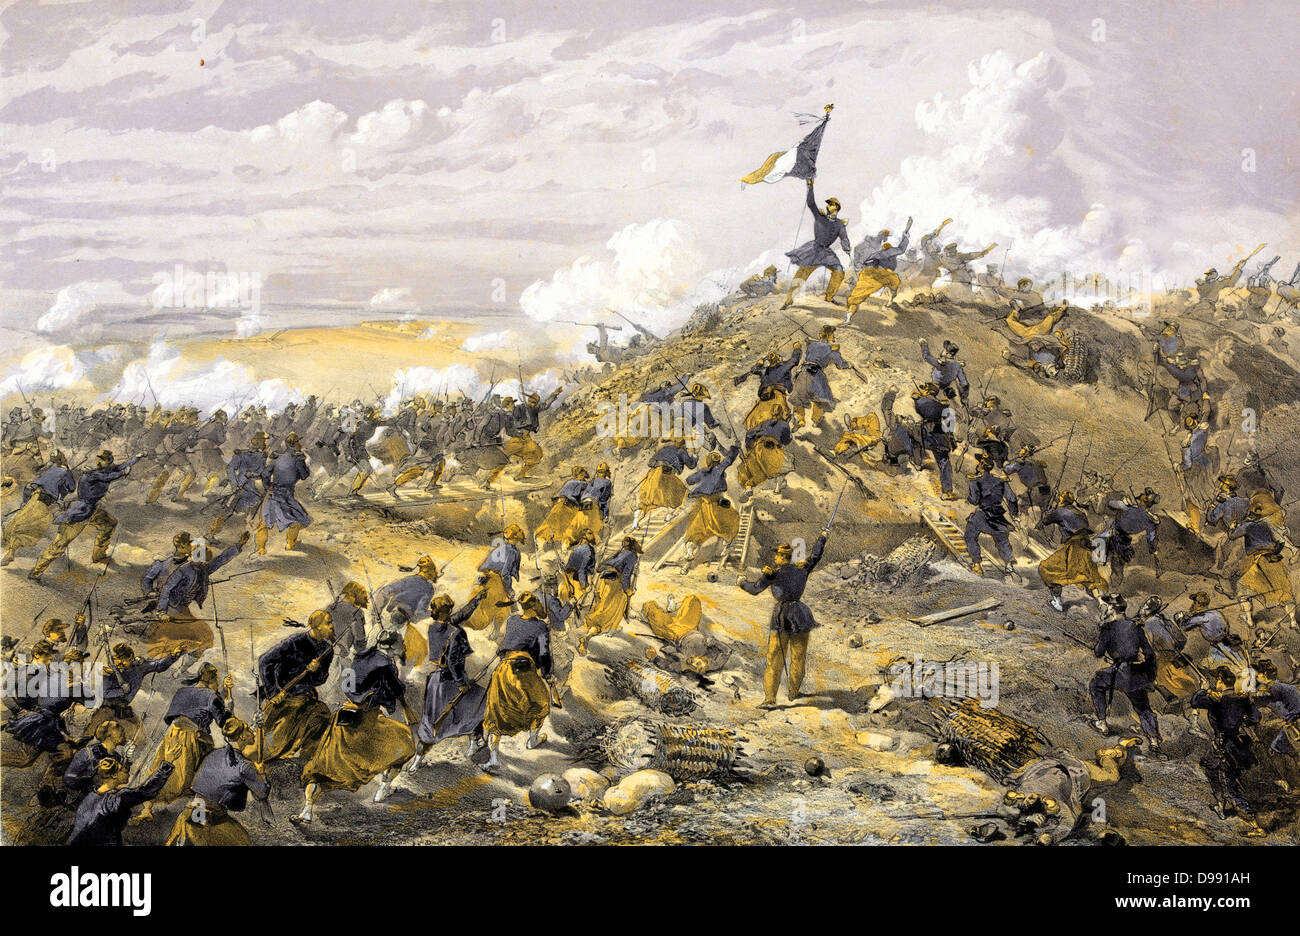 Crimean War 1853-1856: 'French assault on the Malakoff, Russian fortification before Sevastopol', French advancing from left, in foreground are Zouaves, French North African troops. Siege Russia France Turkey Britain Ottoman Stock Photo